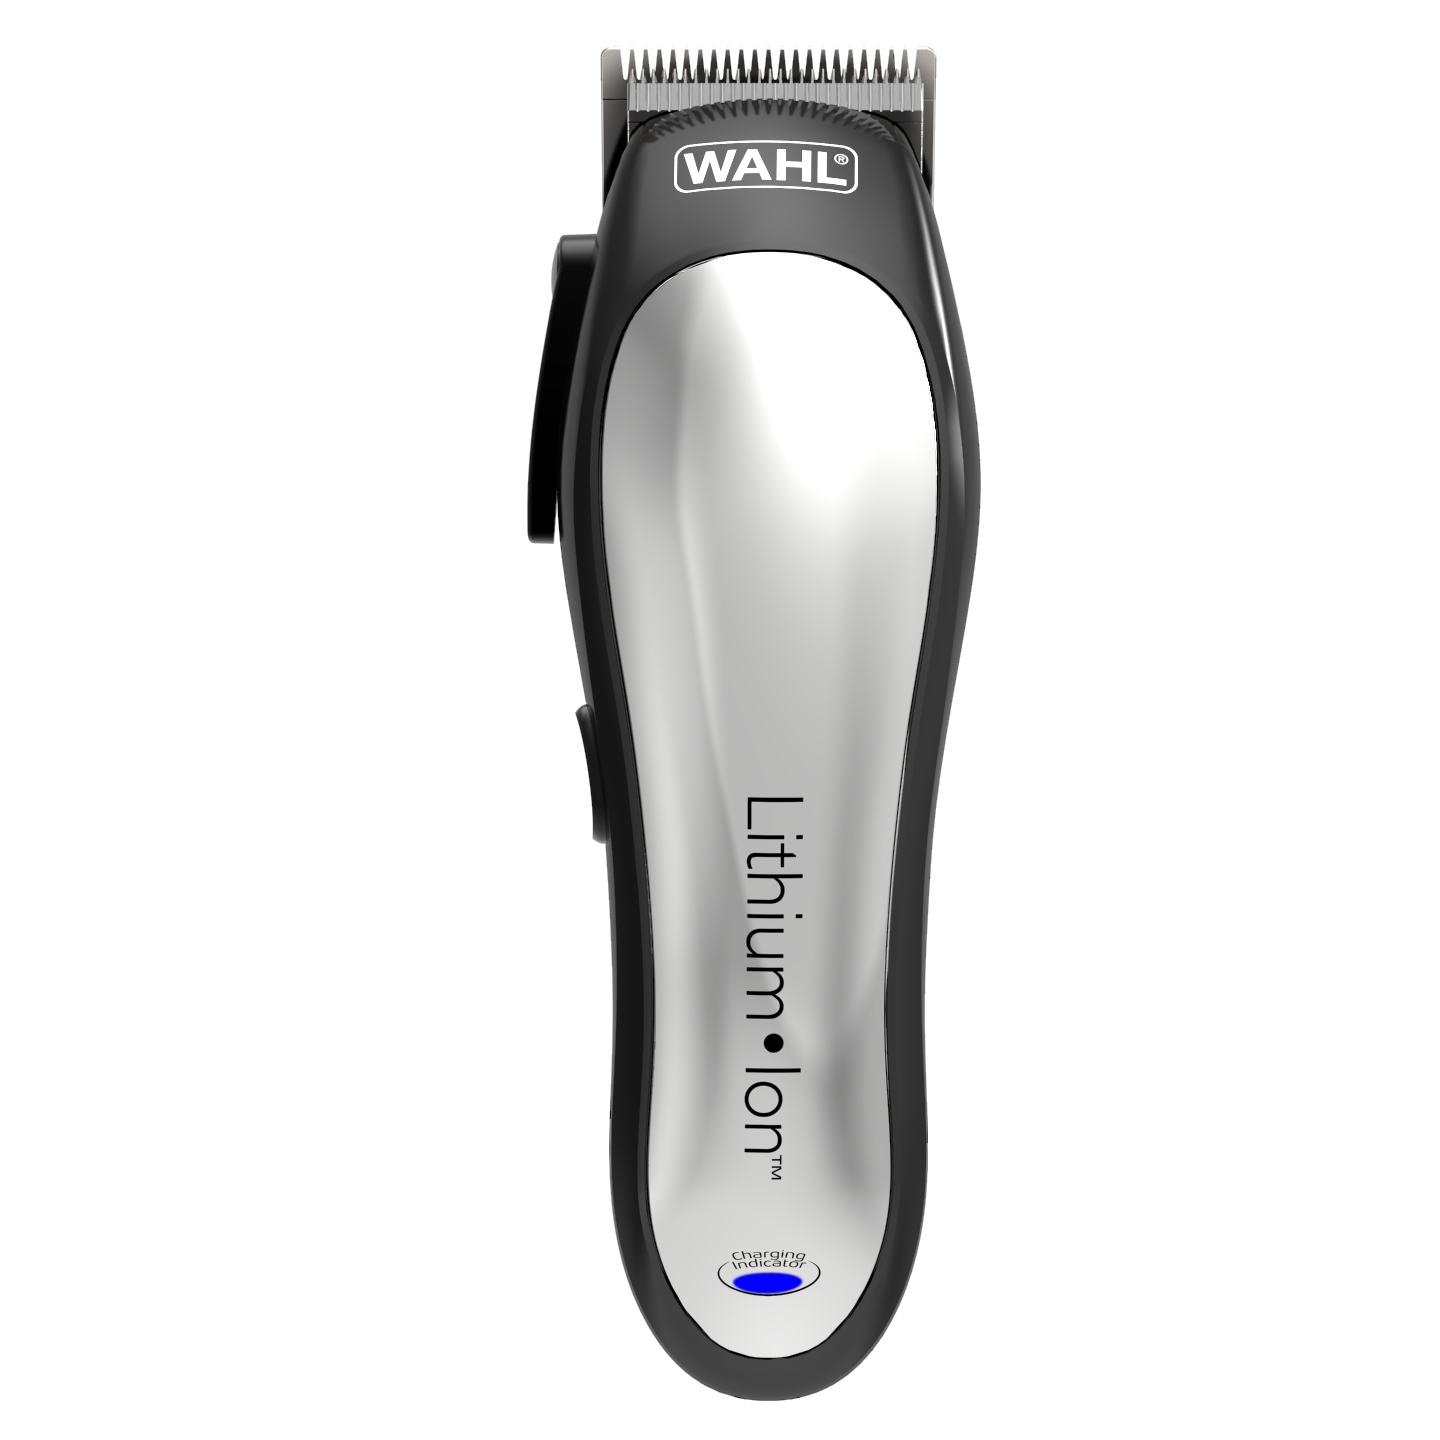 power city hair clippers